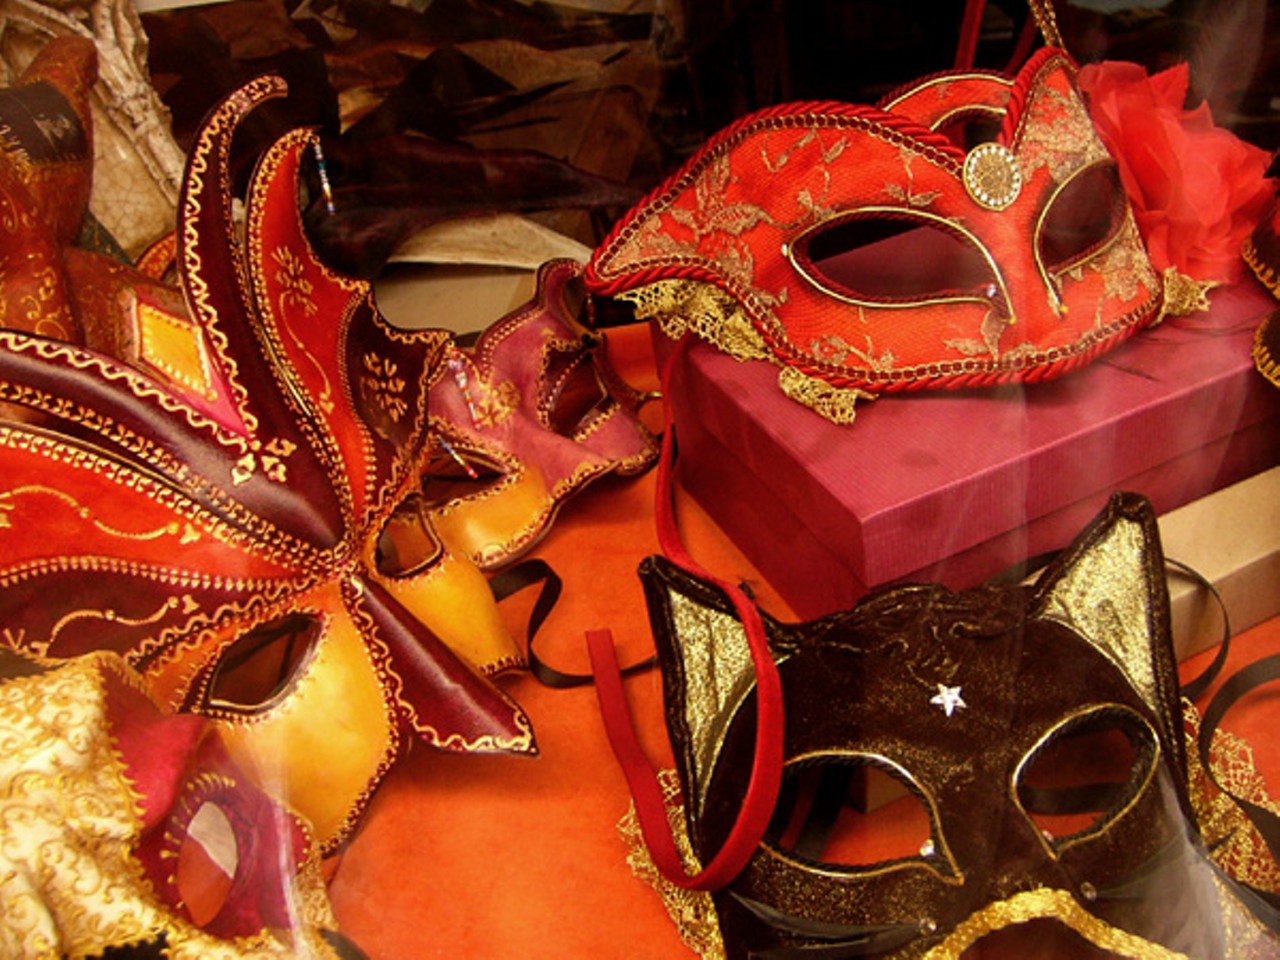 Grab your mask and go to Lago's Masquerade Ball beginning at 7 p.m.
Photo: Flickr cc